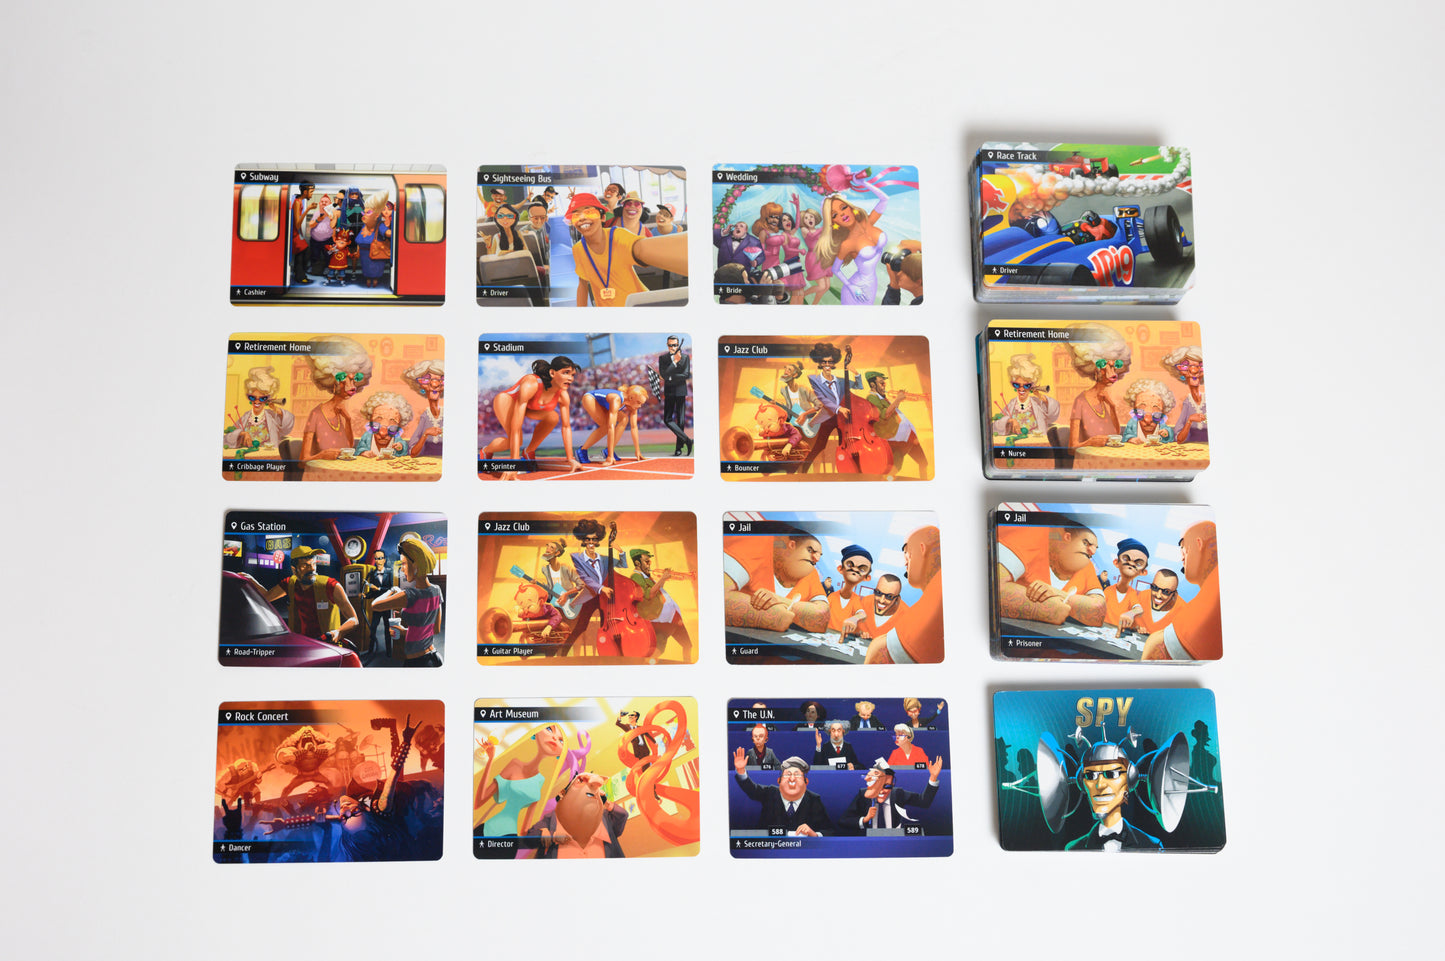 Spyfall 2 - Full view of board game cards 